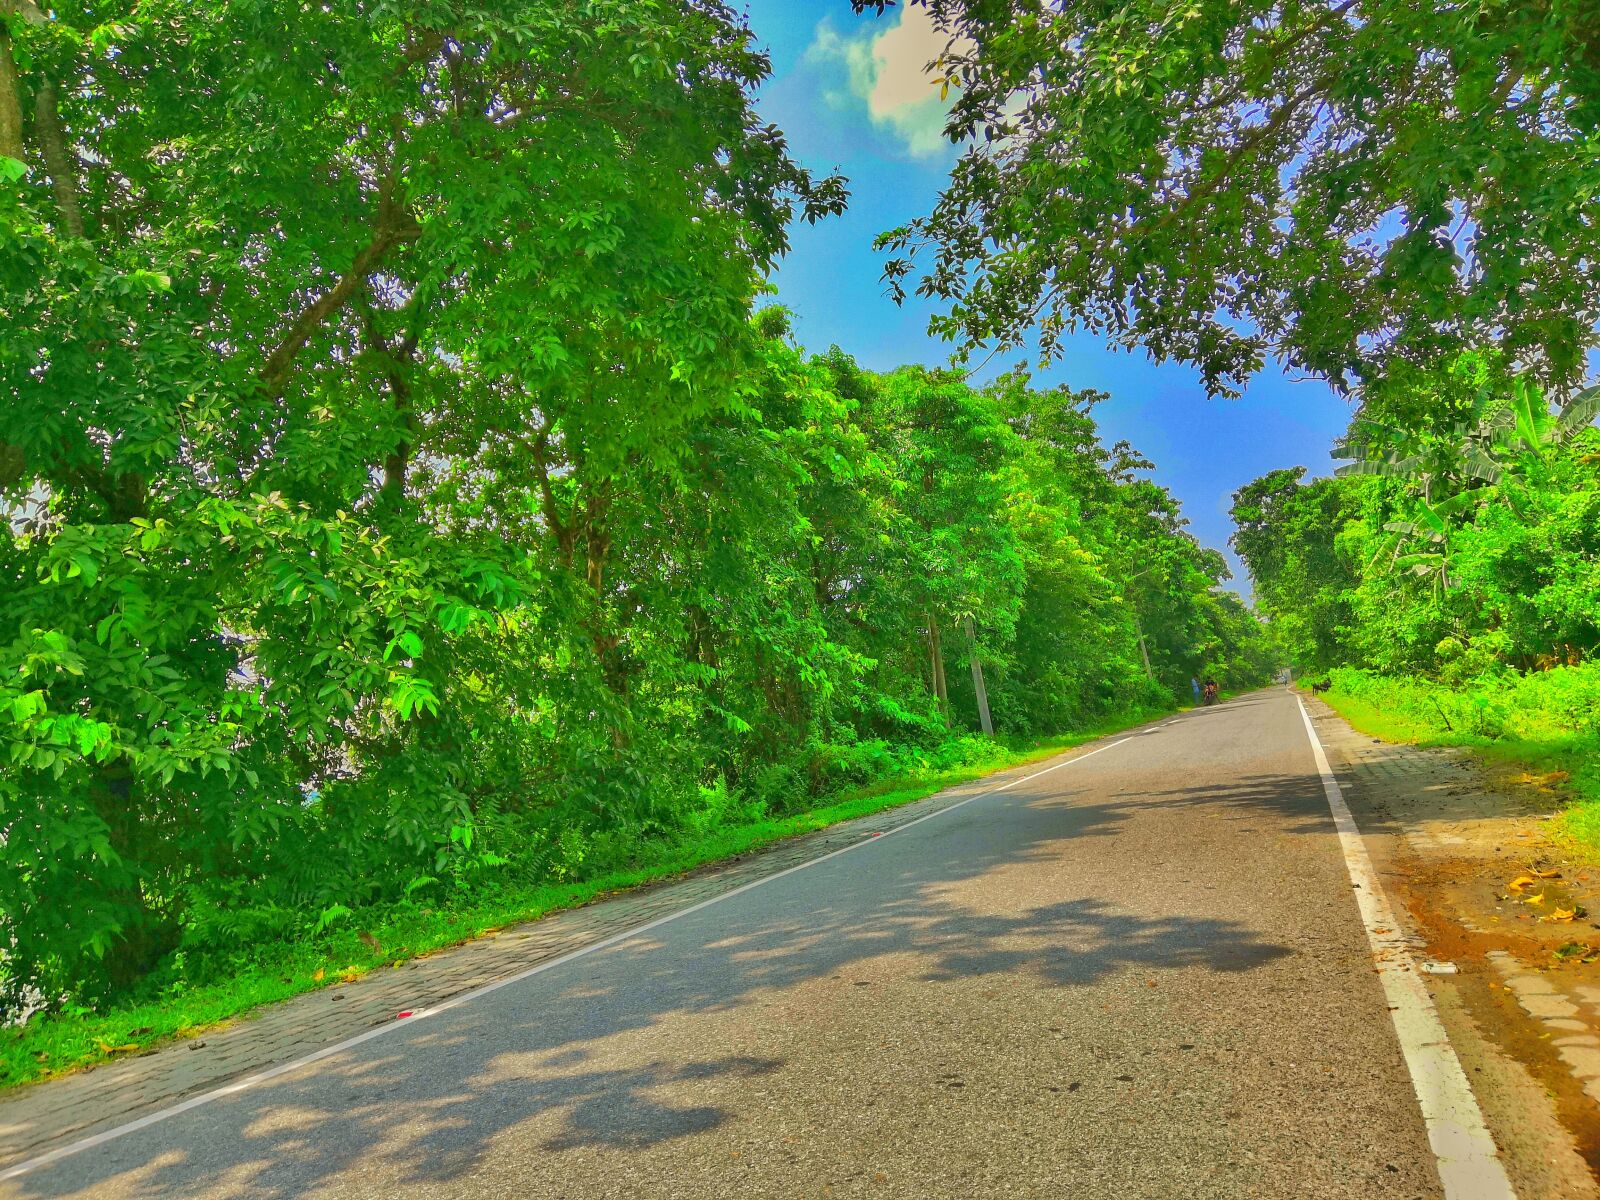 HUAWEI Honor Play sample photo. Road, assam road, nature photography